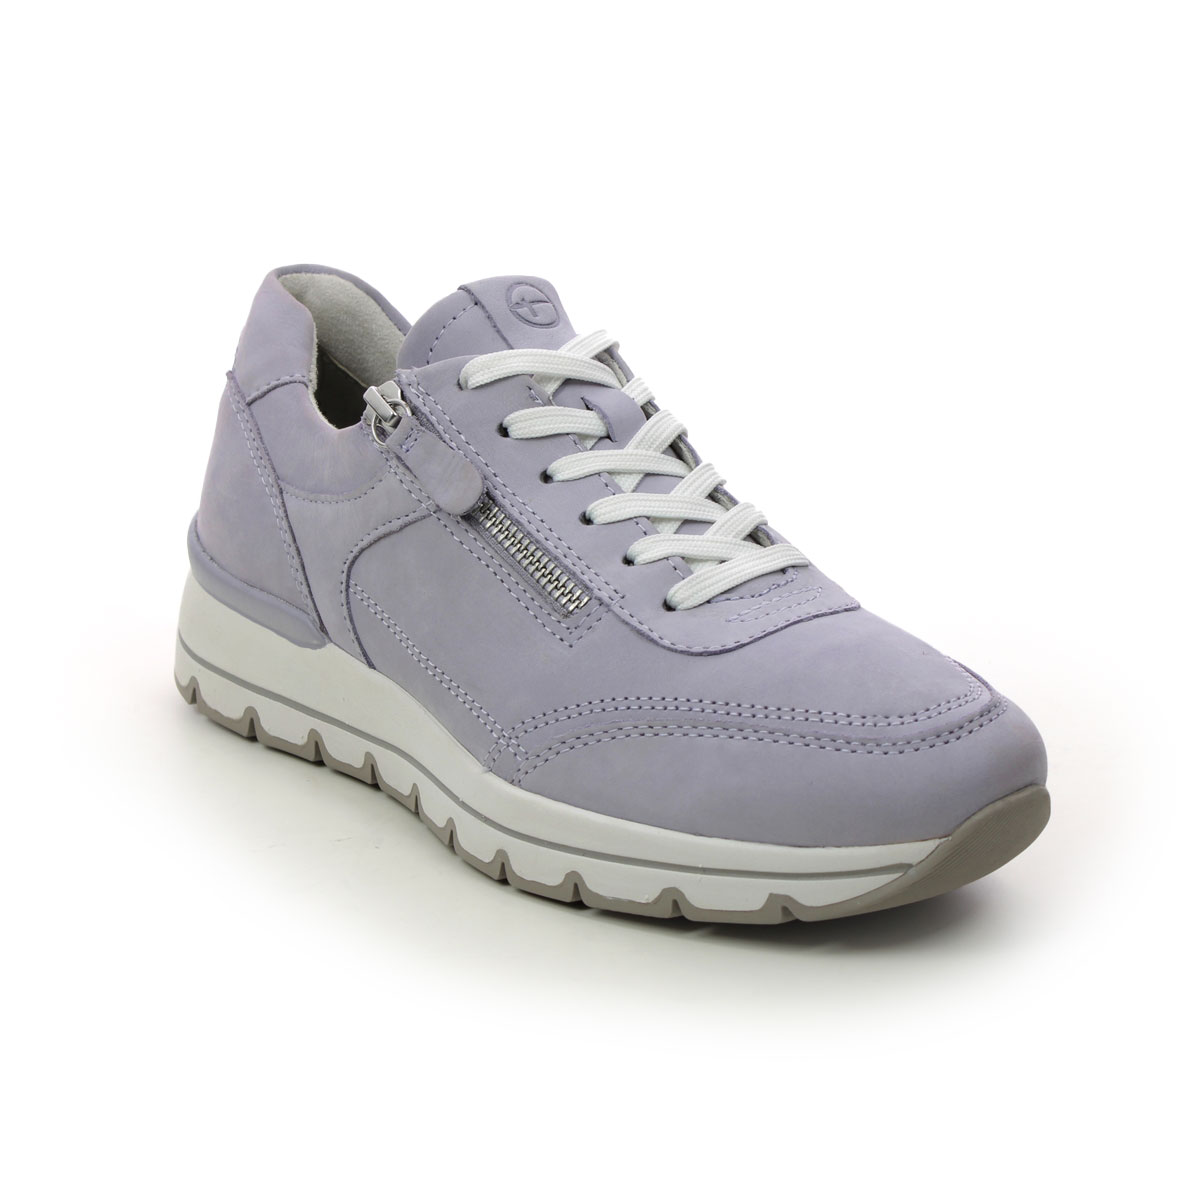 Tamaris Vinnie Zip Lilac Womens Trainers 23725-30-543 In Size 39 In Plain Lilac